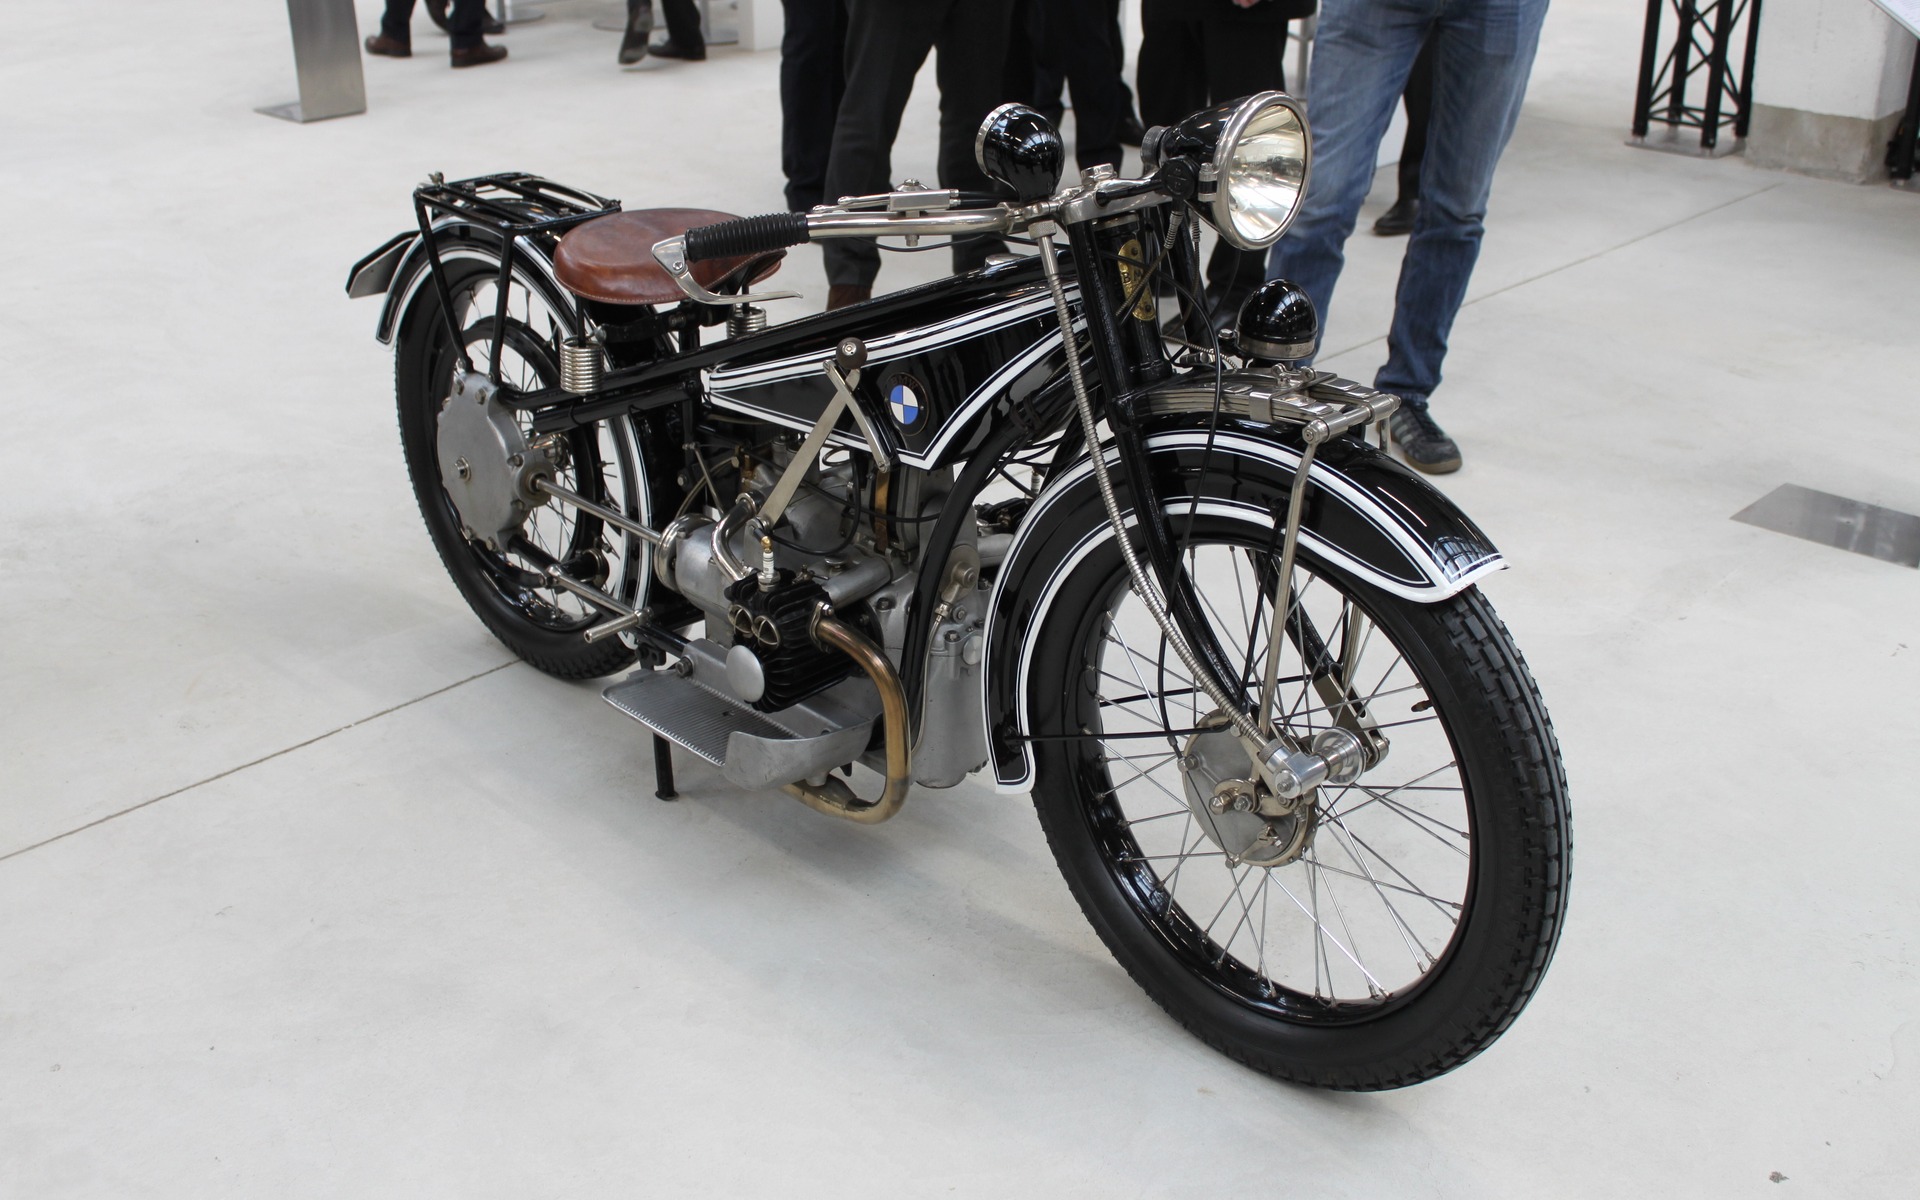 BMW’s first motorcycle